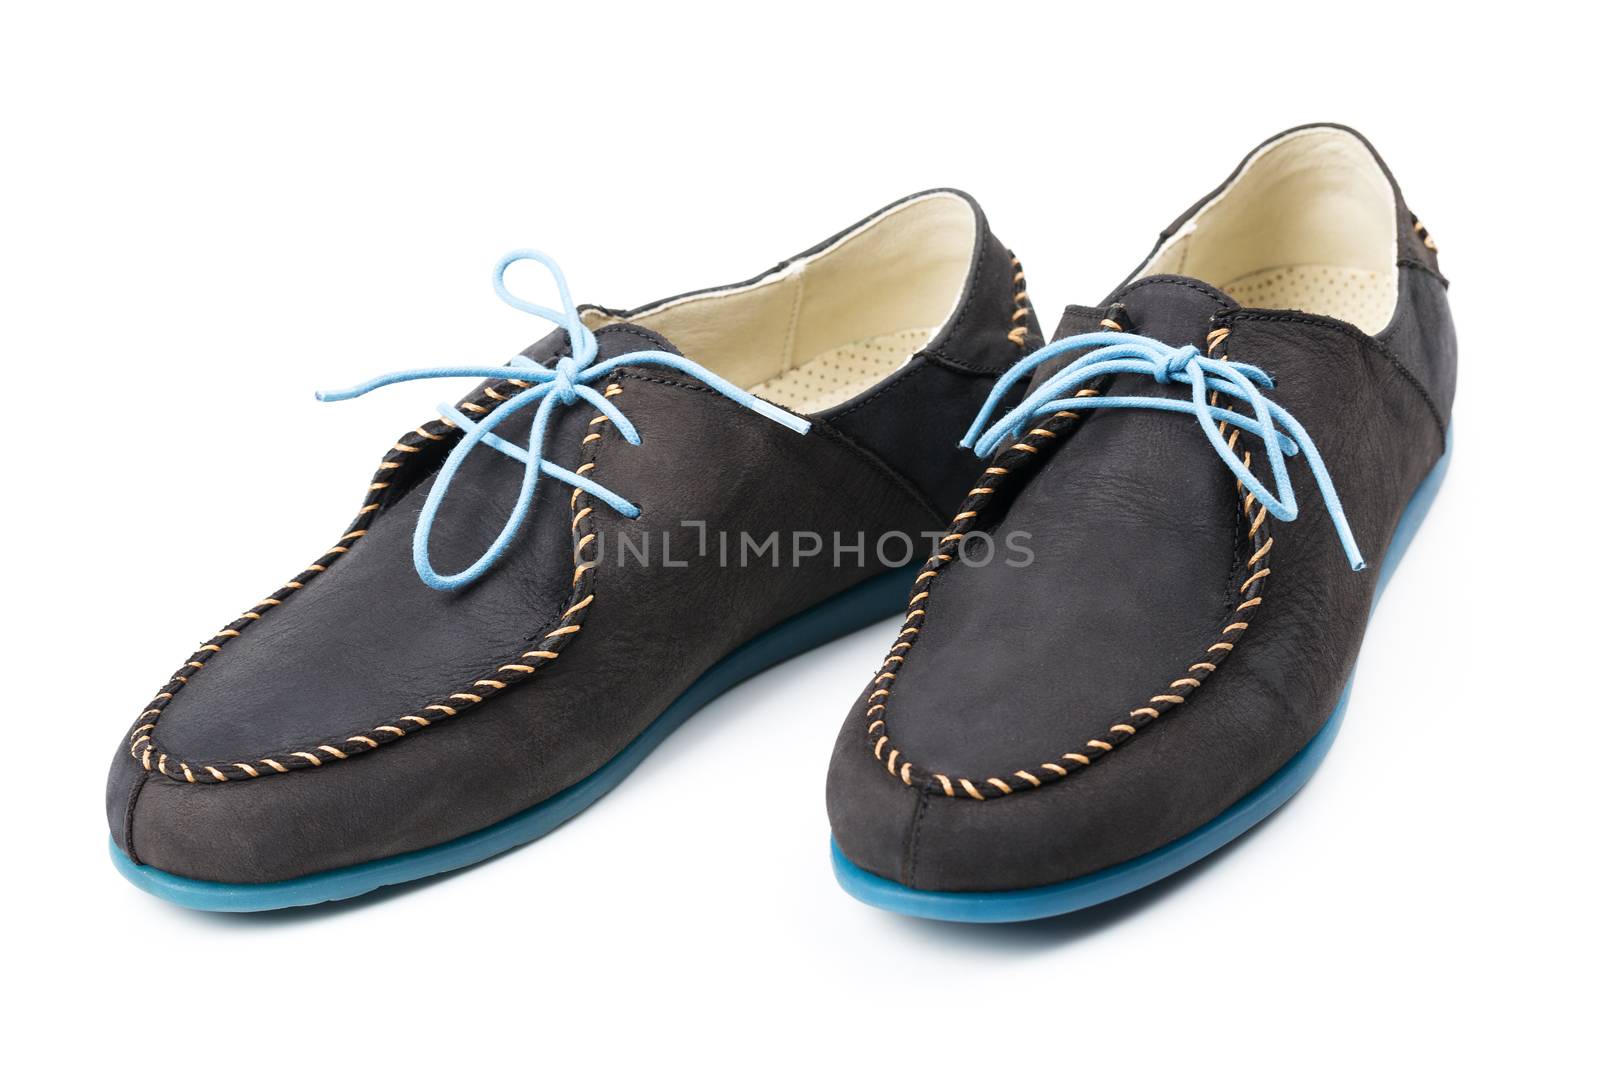 Black men's leather loafers with blue soles and laces on a white by vlad_star